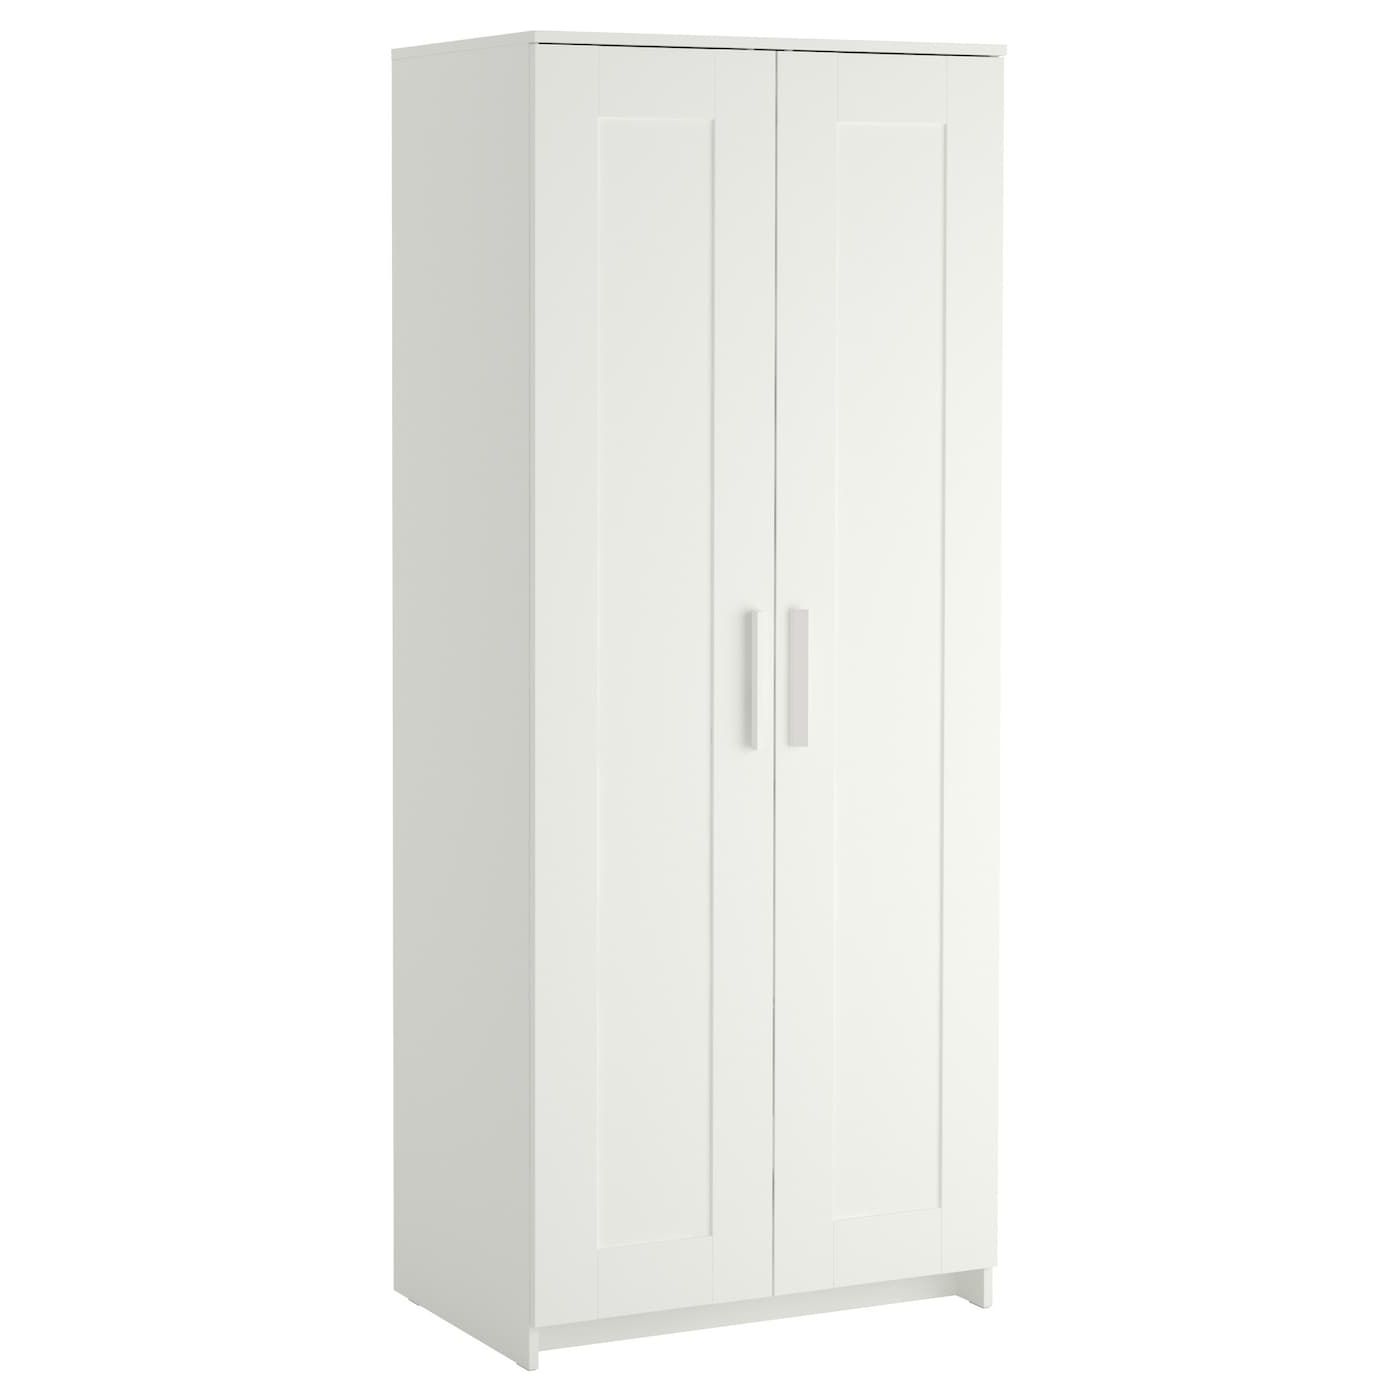 Most Current 2 Door Wardrobes Intended For Brimnes Wardrobe With 2 Doors, White, 30 3/4x74 3/4" – Ikea (Photo 9 of 10)